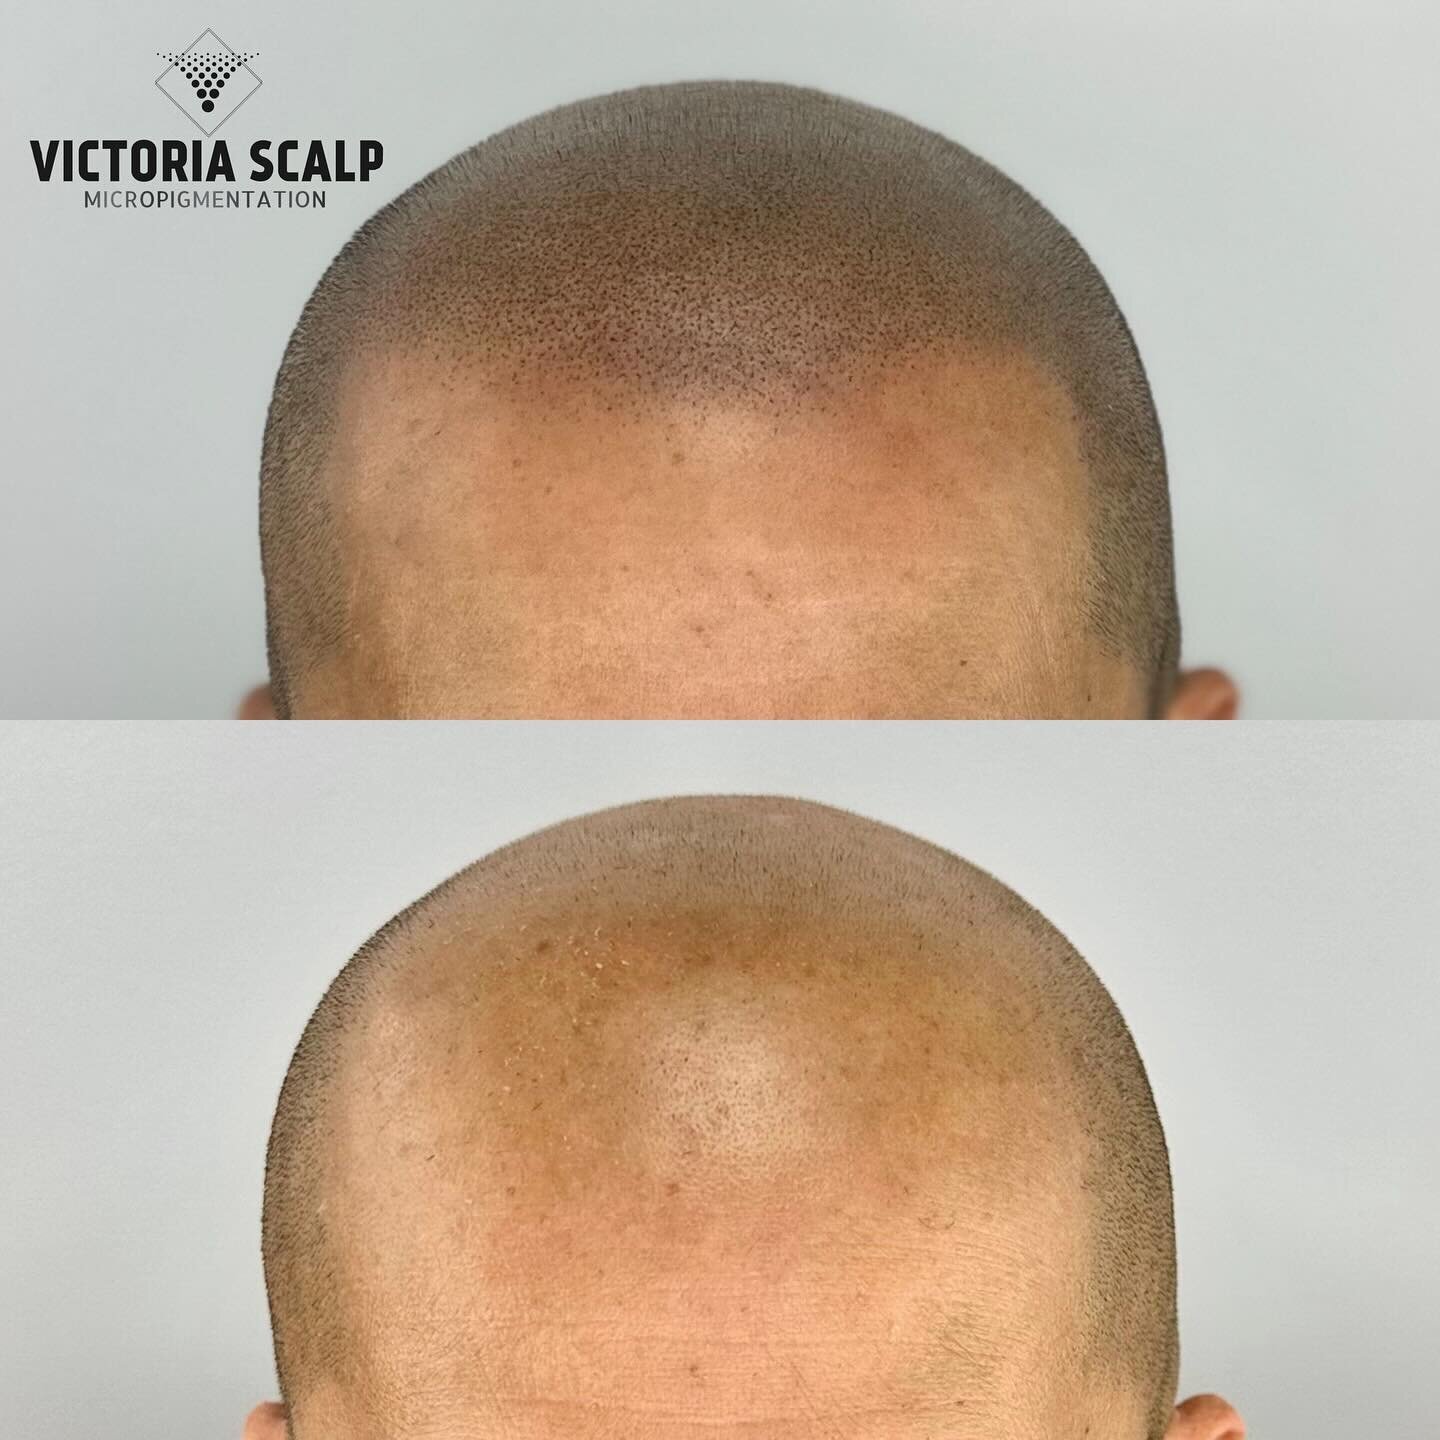 &bull;CROWN TO HAIRLINE SMP&bull; 🔥🔥🔥
Before &amp; After 3 Sessions
&bull;training model final result&bull; 
&gt;&gt;&gt;SWIPE for full zoomable images 

A big thank you to Danny for being part of our training as a model. Students completed first 